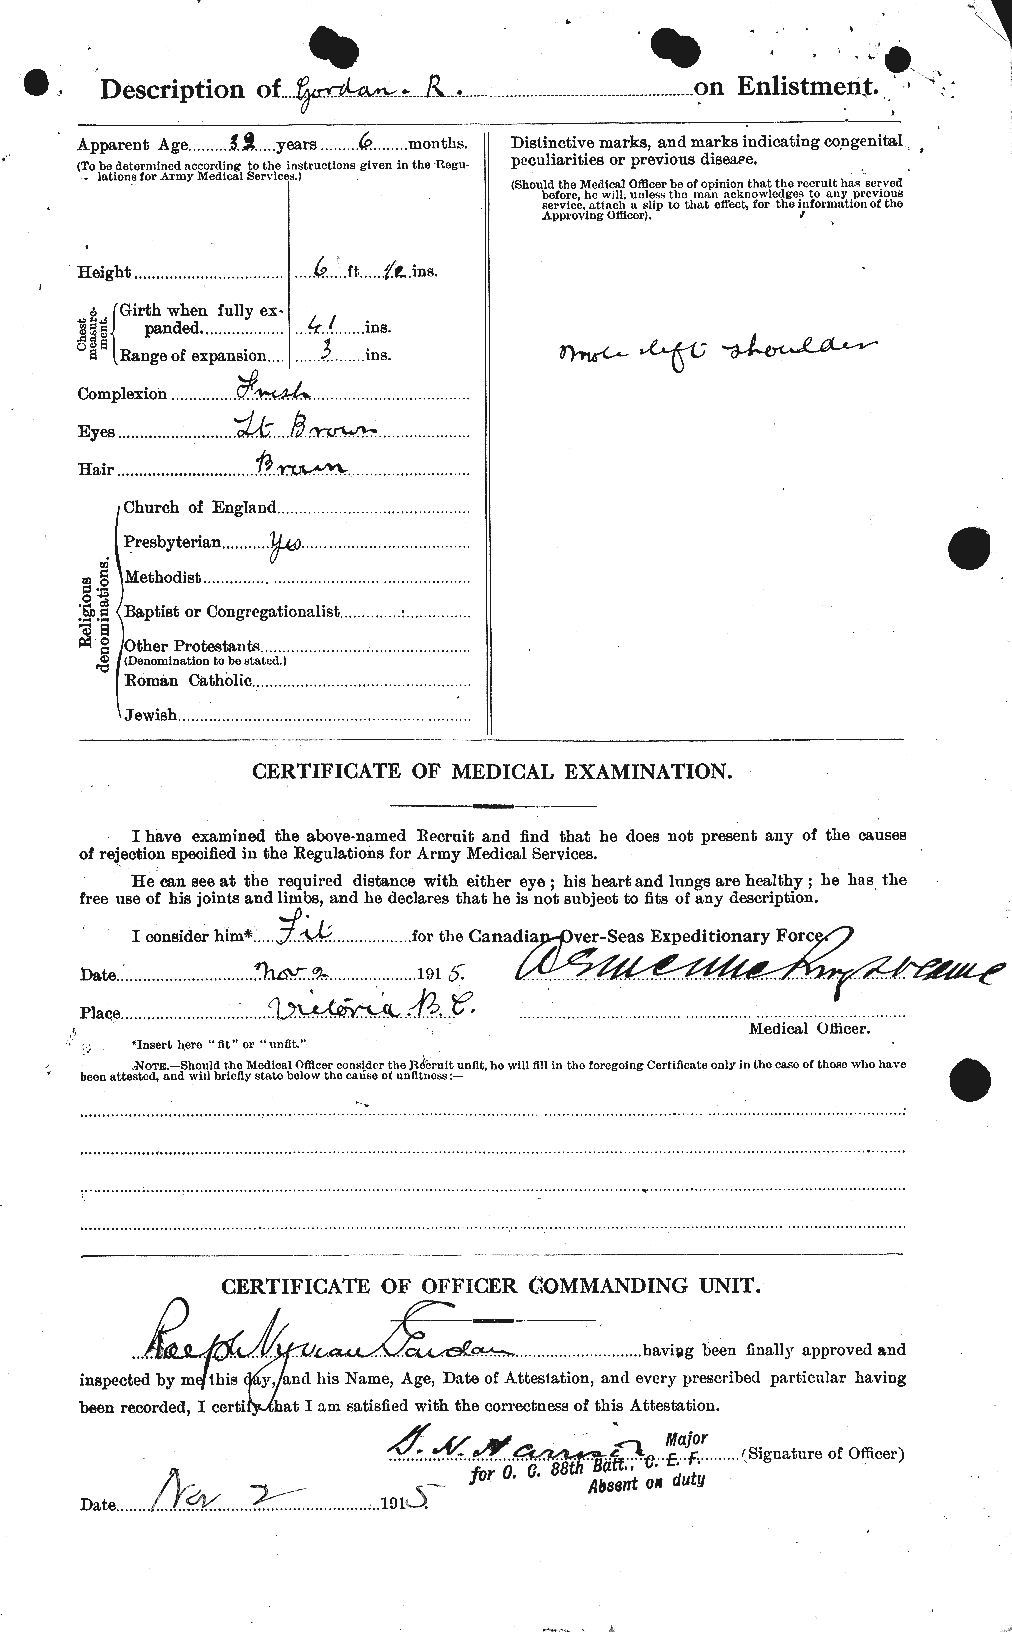 Personnel Records of the First World War - CEF 355914b